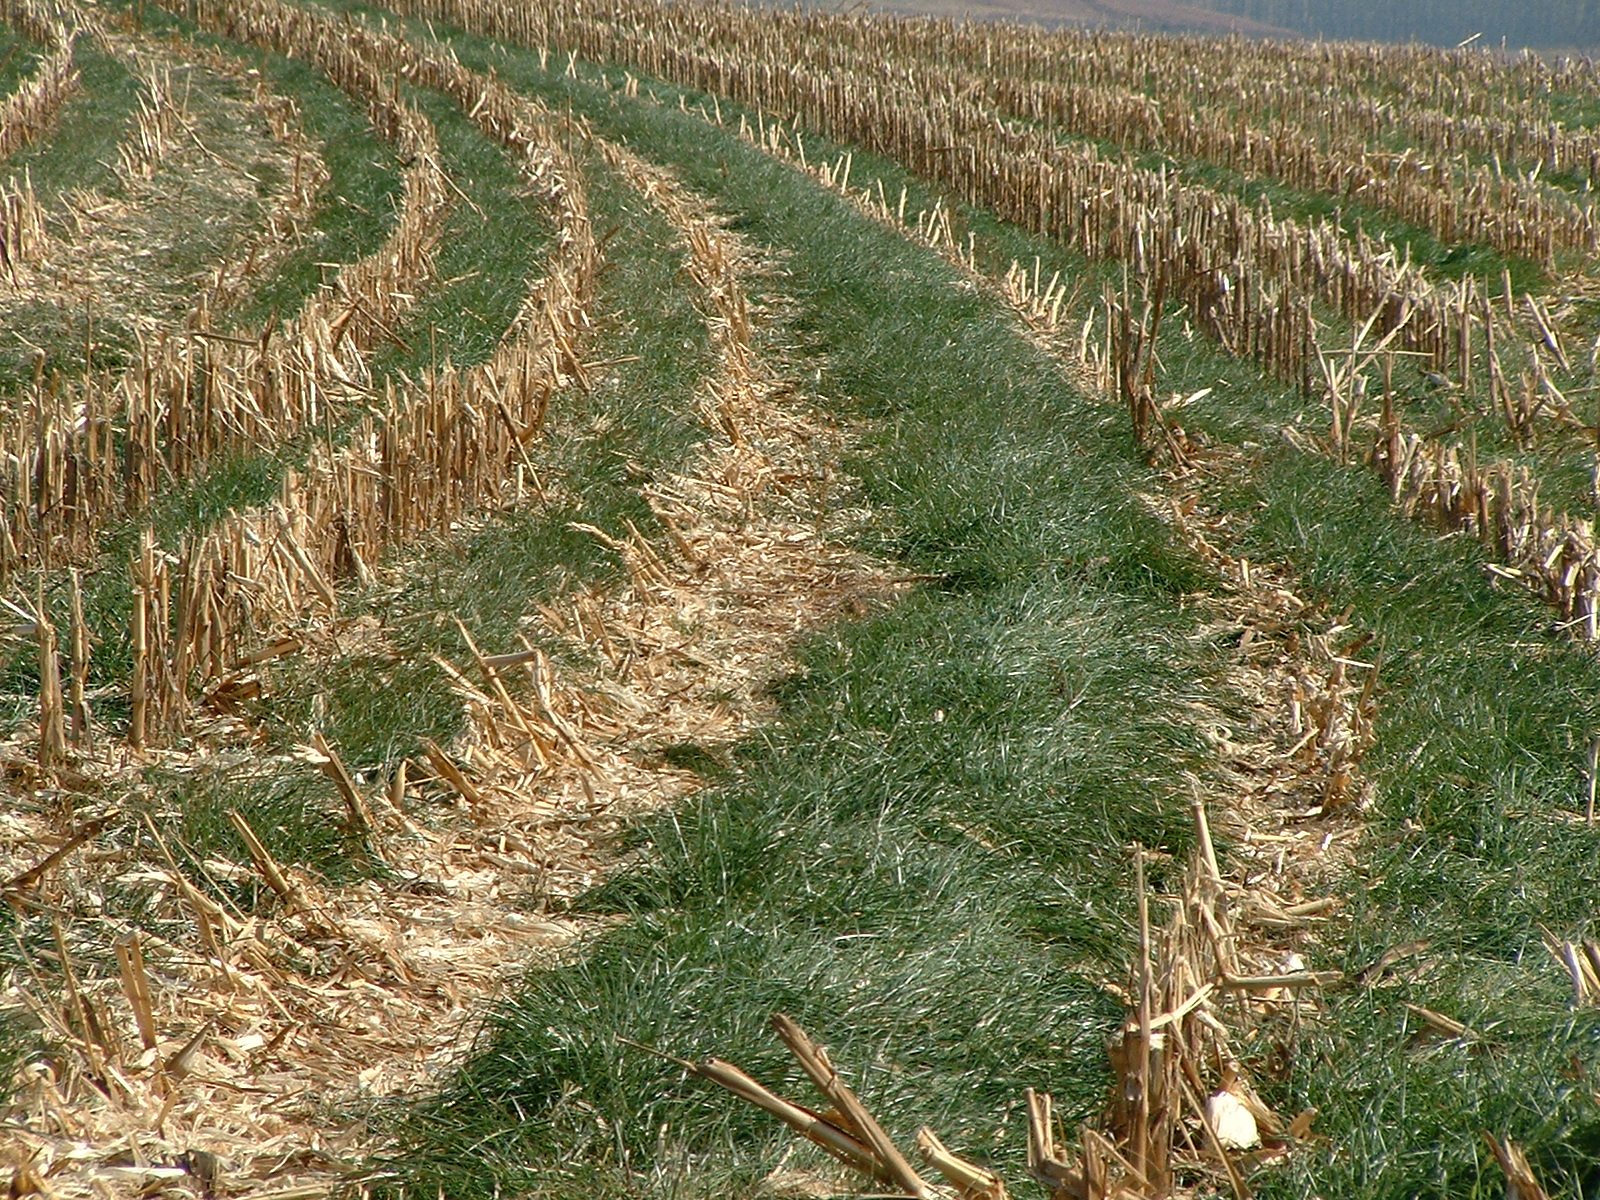 What Can Farmers Do About Climate Change? Cover Crops